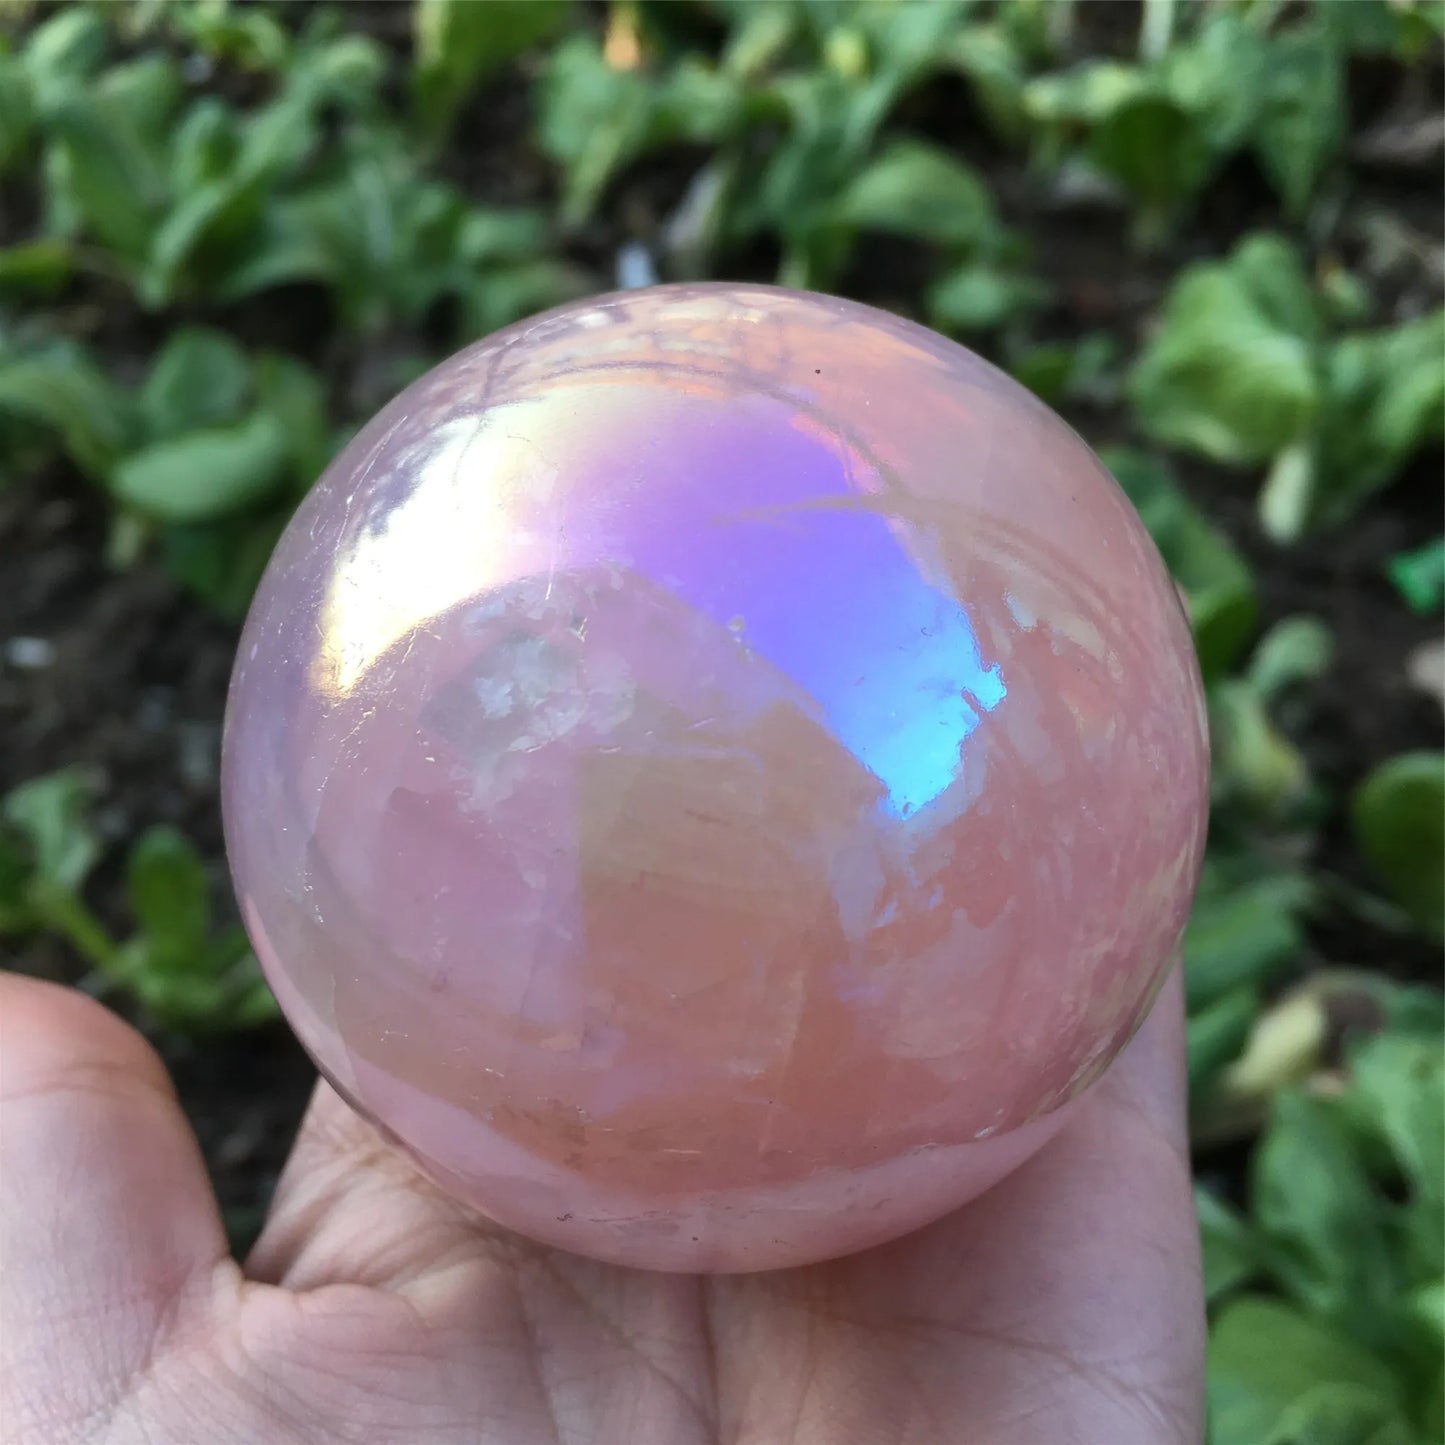 angel aura rose quartz crystals ball natural stones and minerals gemstone sphere home decoration feng shui crafts